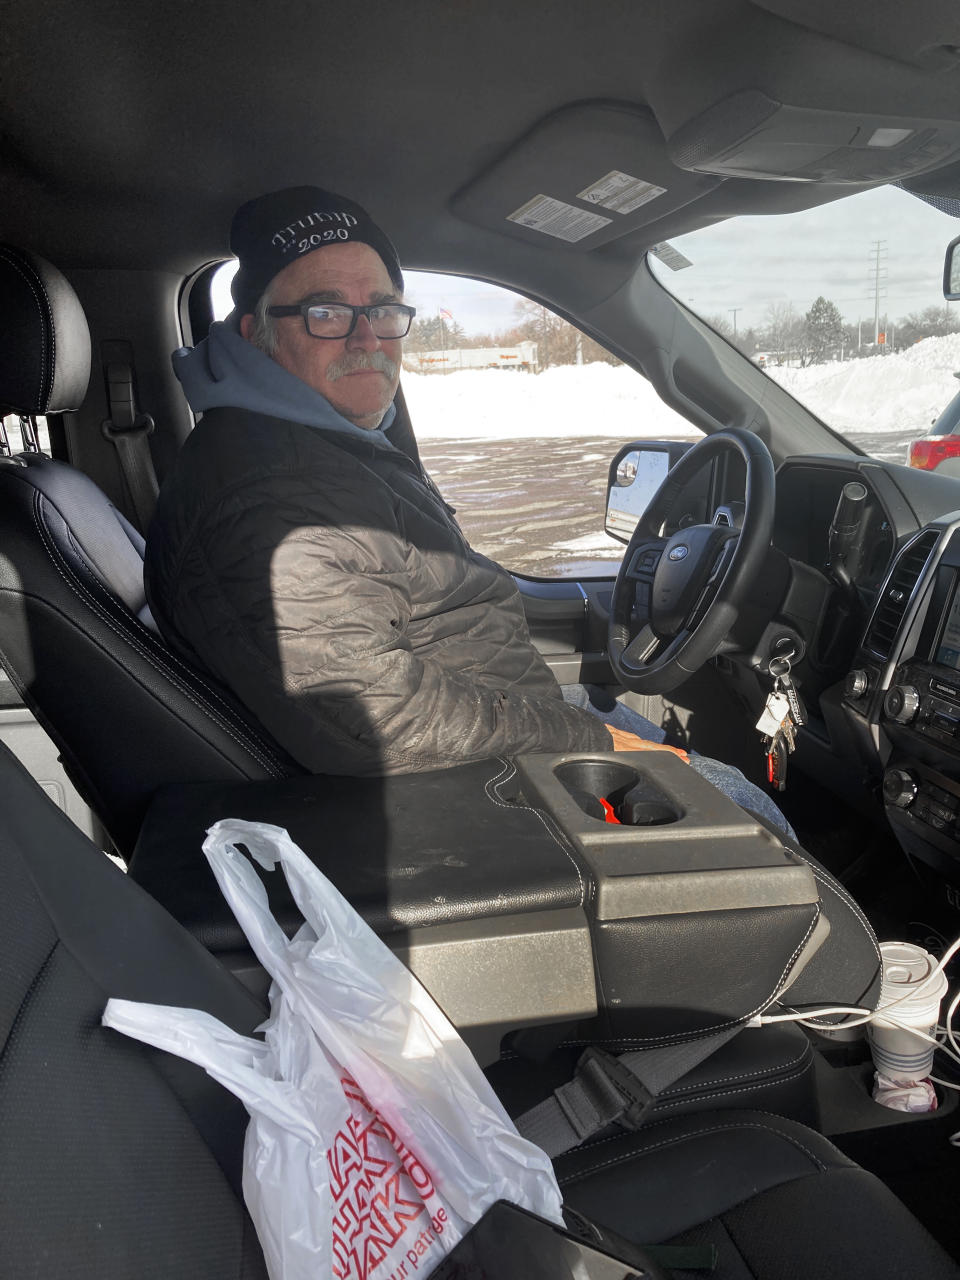 Larry Parsons, who bought a used pickup truck last year in part due to the high cost of new trucks, sits inside his Ford F-150 in Livonia, Mich., Tuesday, Feb. 16, 2021. A chain reaction touched off by the coronavirus pandemic has pushed new-vehicle prices to record highs and dramatically driven up the cost of used ones. (AP Photo/Mike Householder)